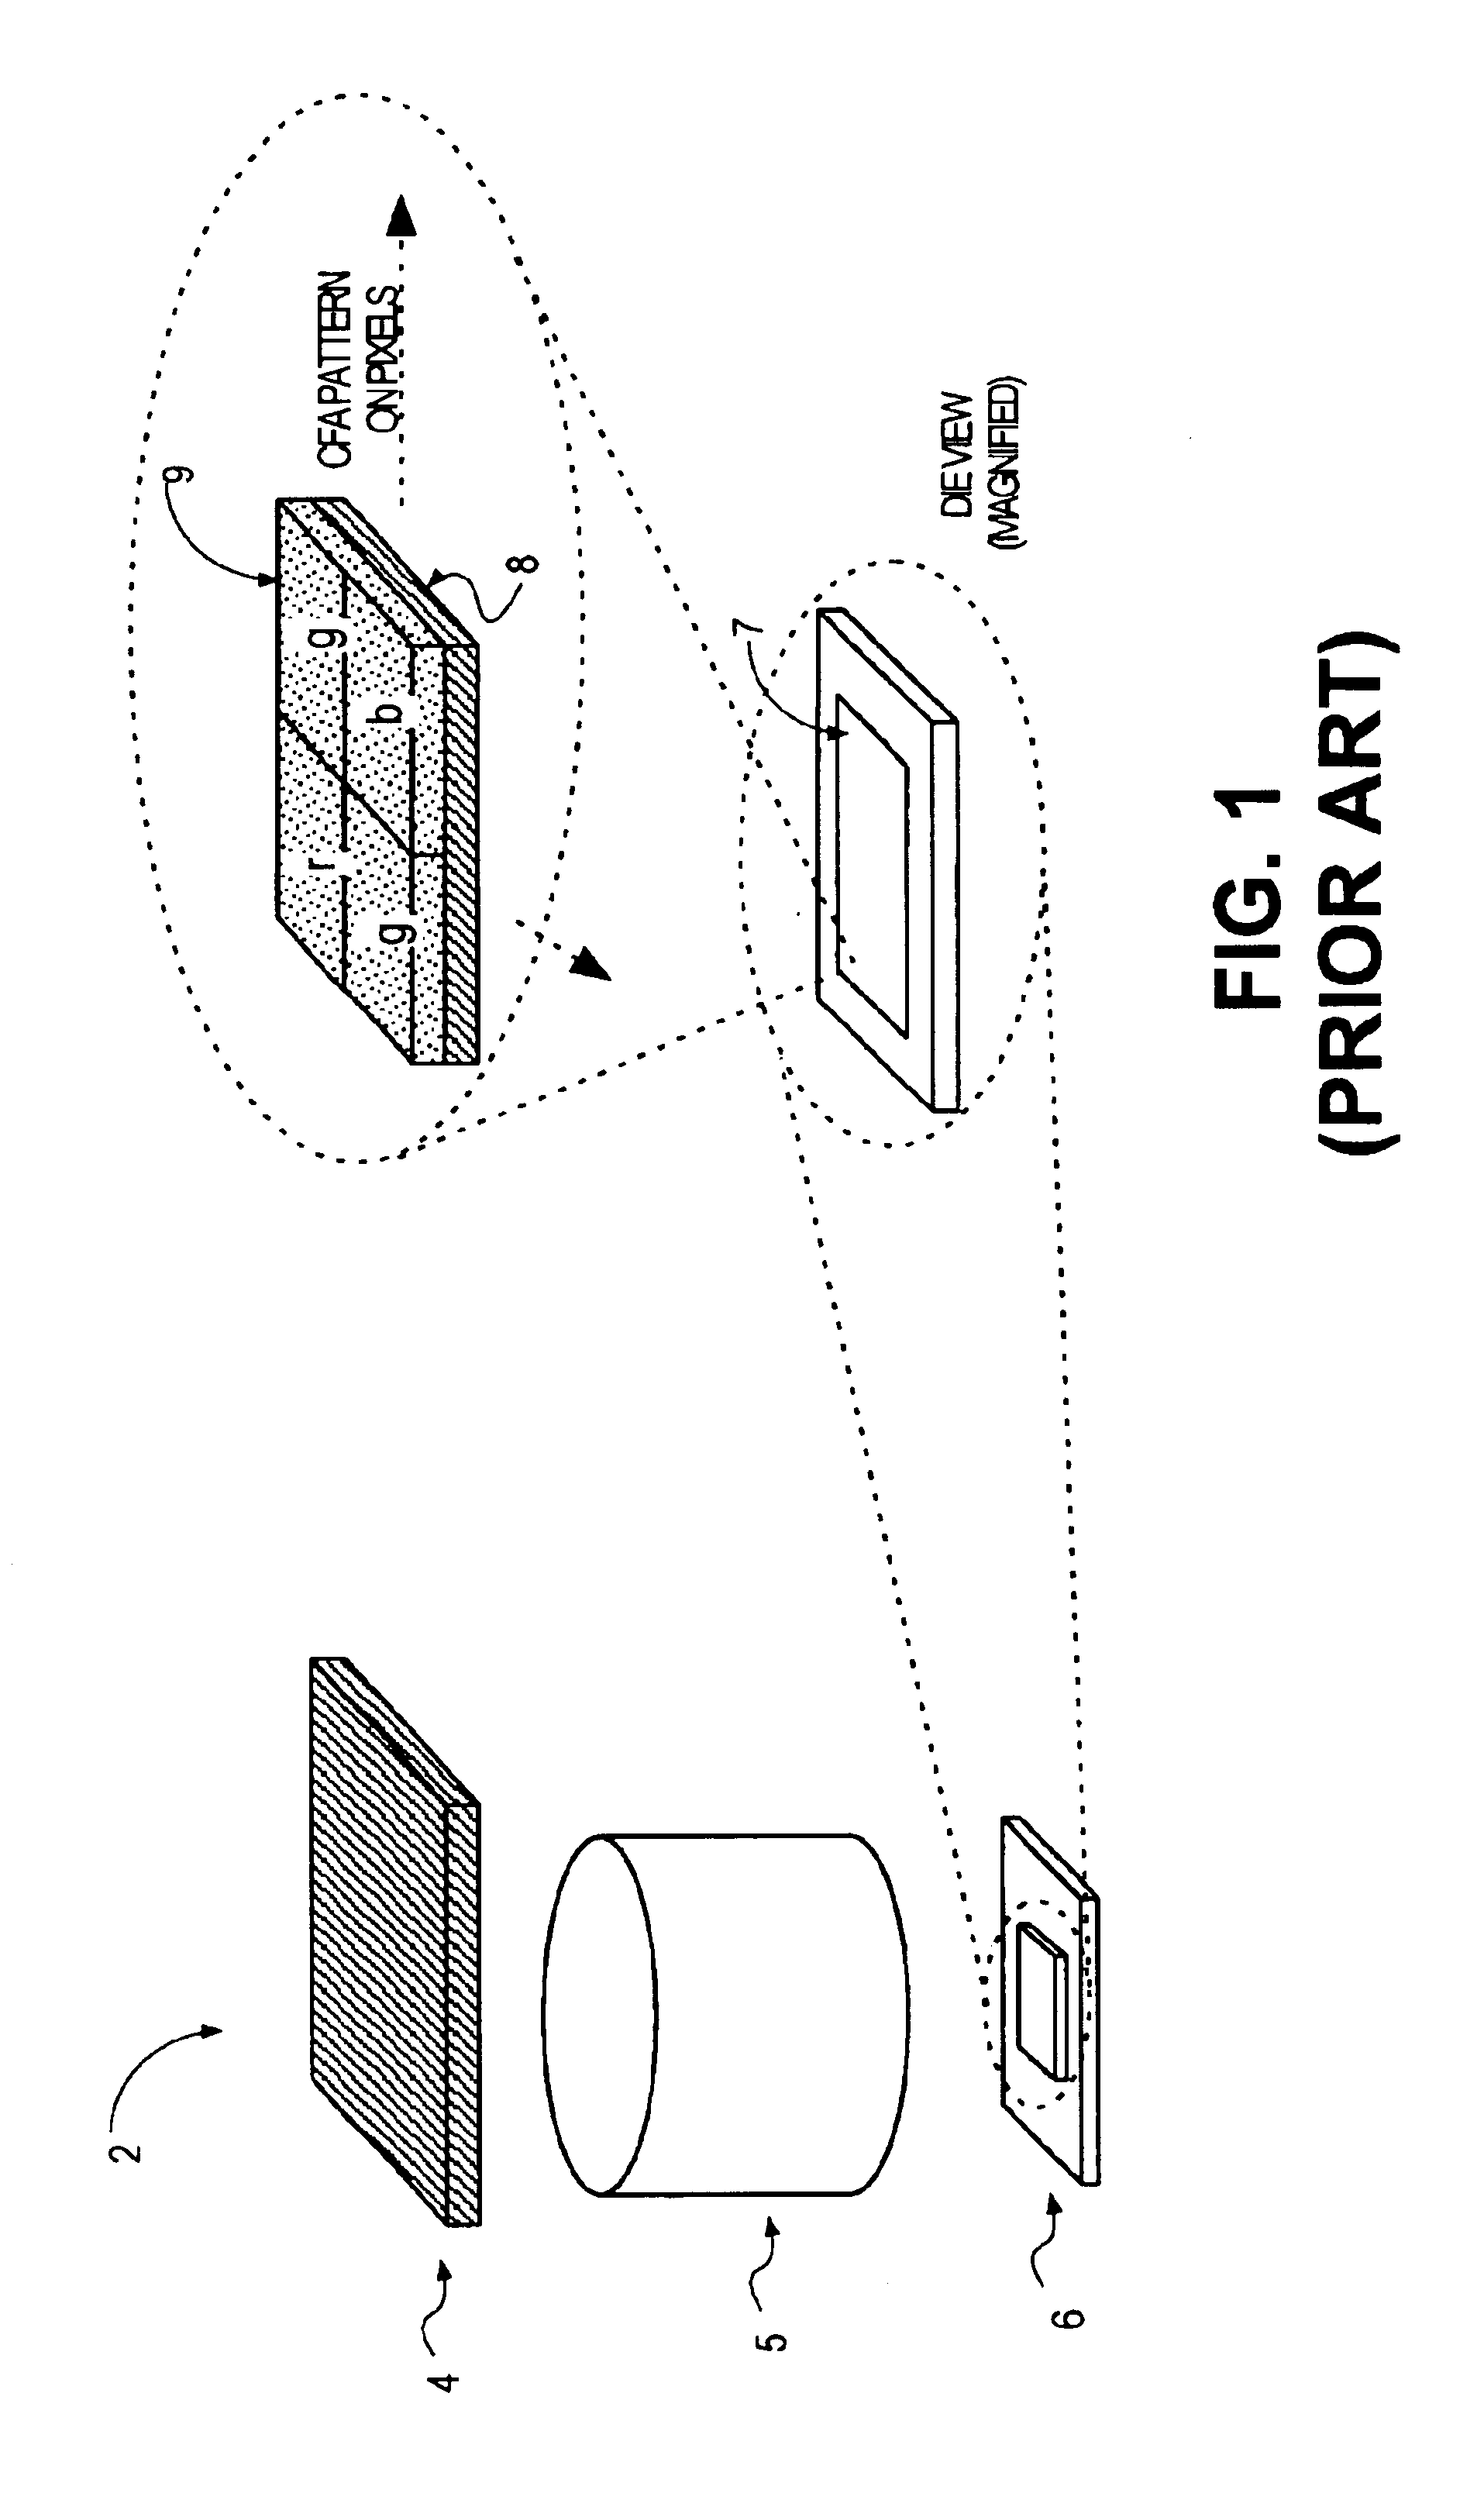 Method and apparatus for employing a light shield to modulate pixel color responsivity